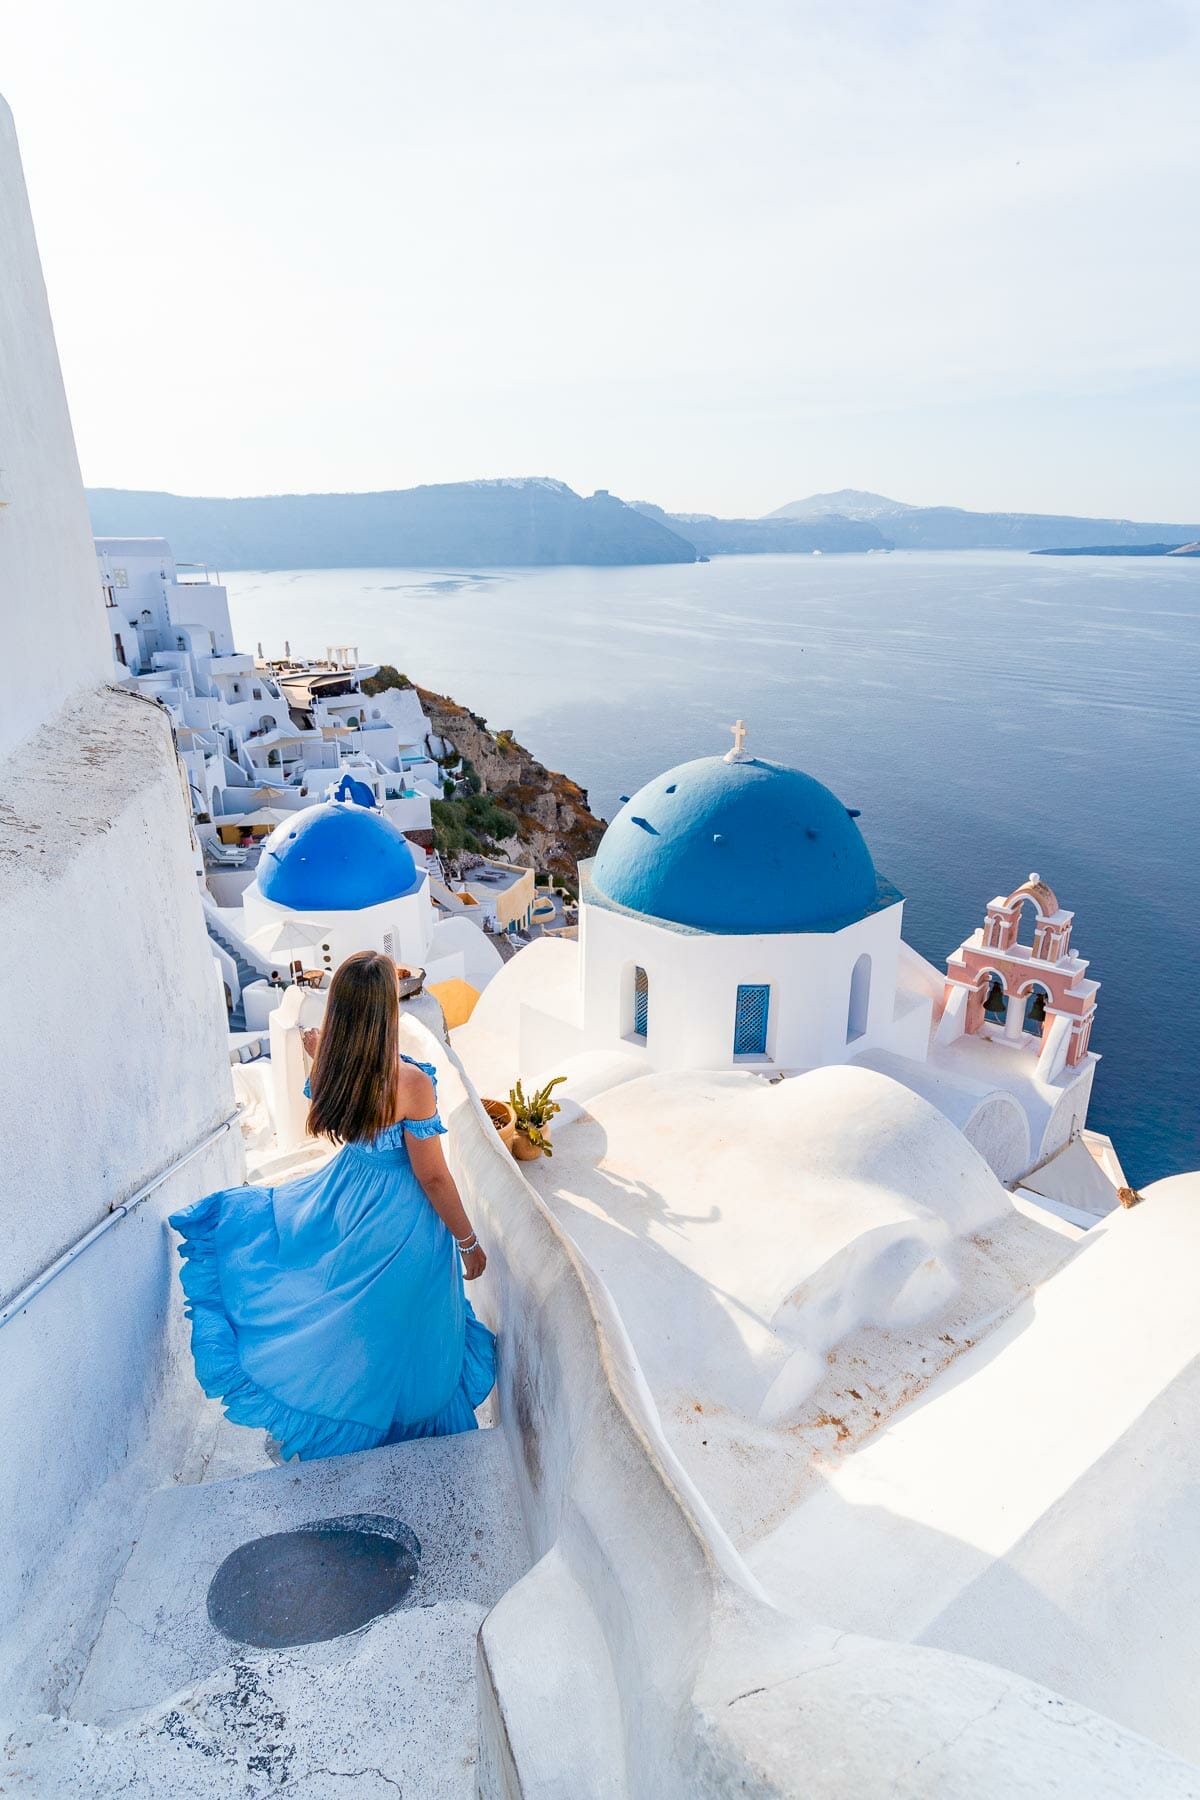 Girl in blue dress at the famous blue dome in Oia, Santorini